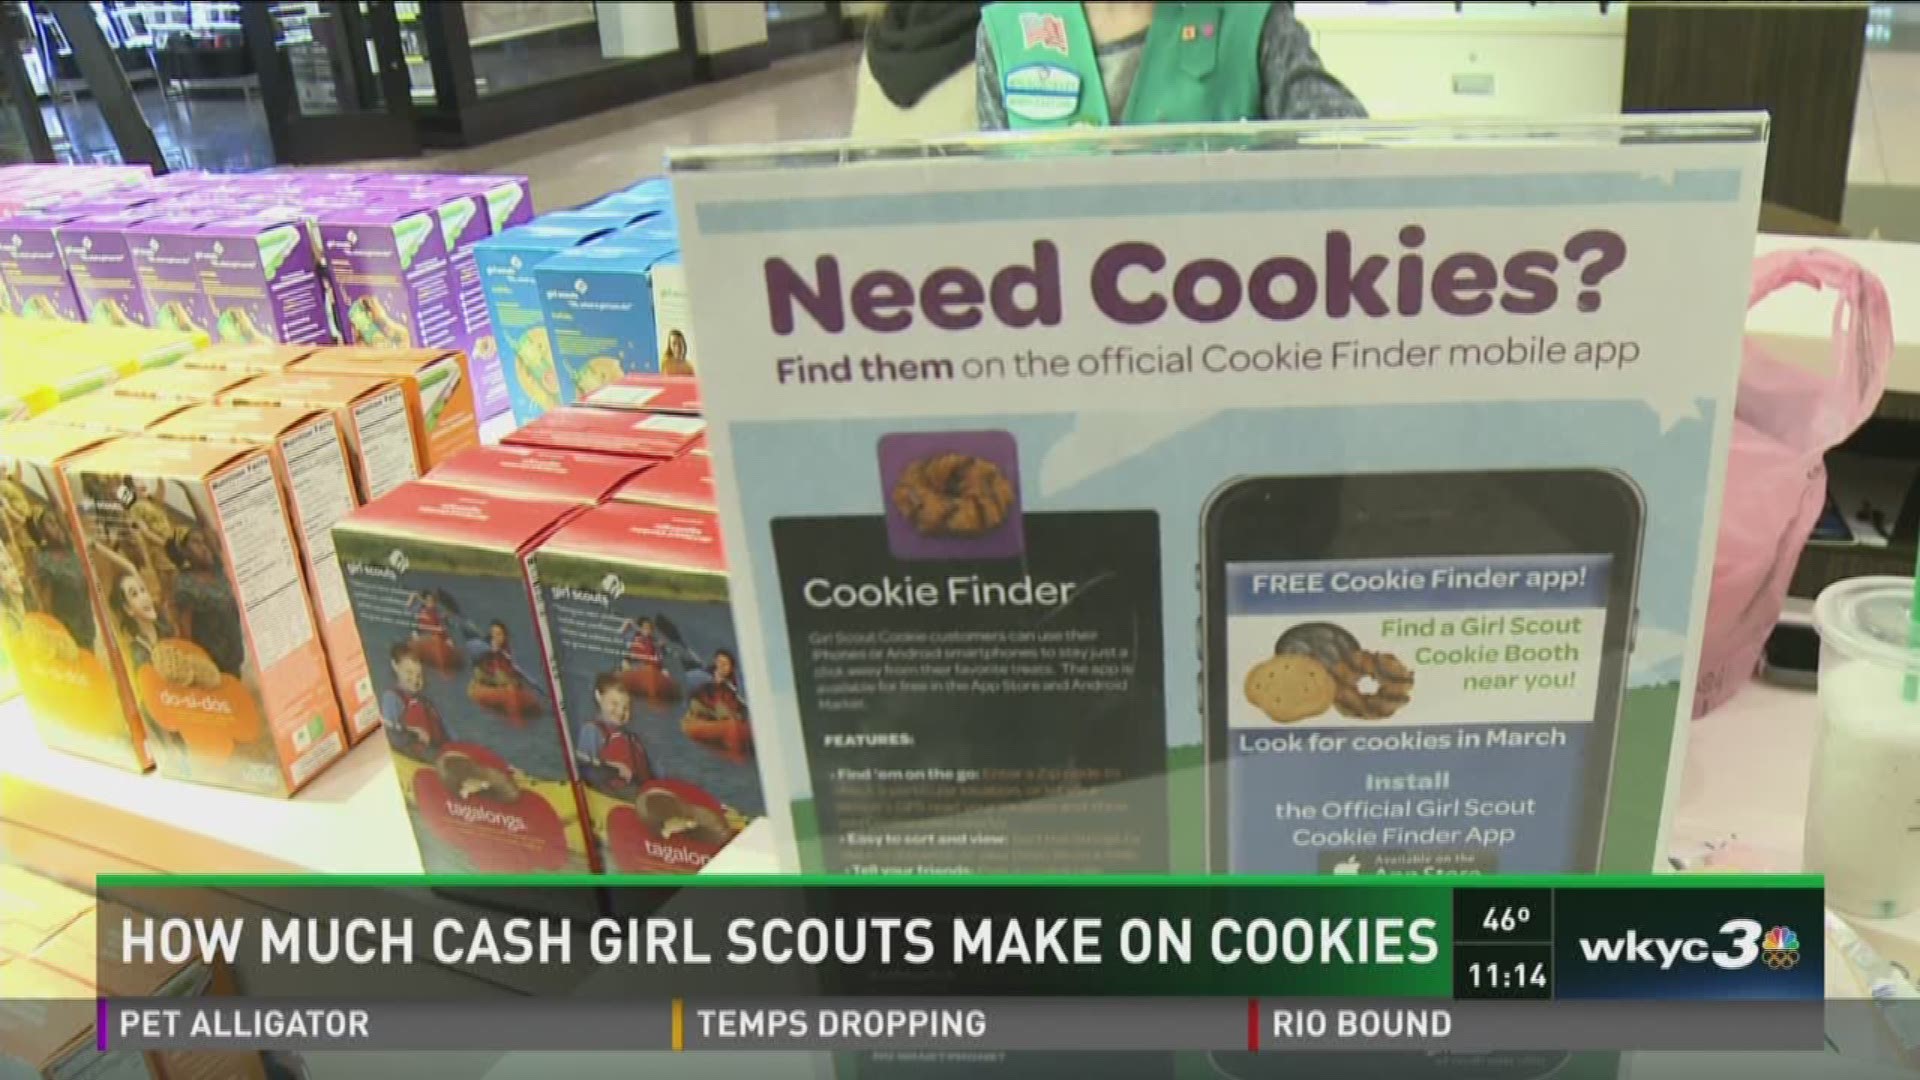 In that $4 box of Girl Scout cookies, how much of the money do you think the girls get to keep?